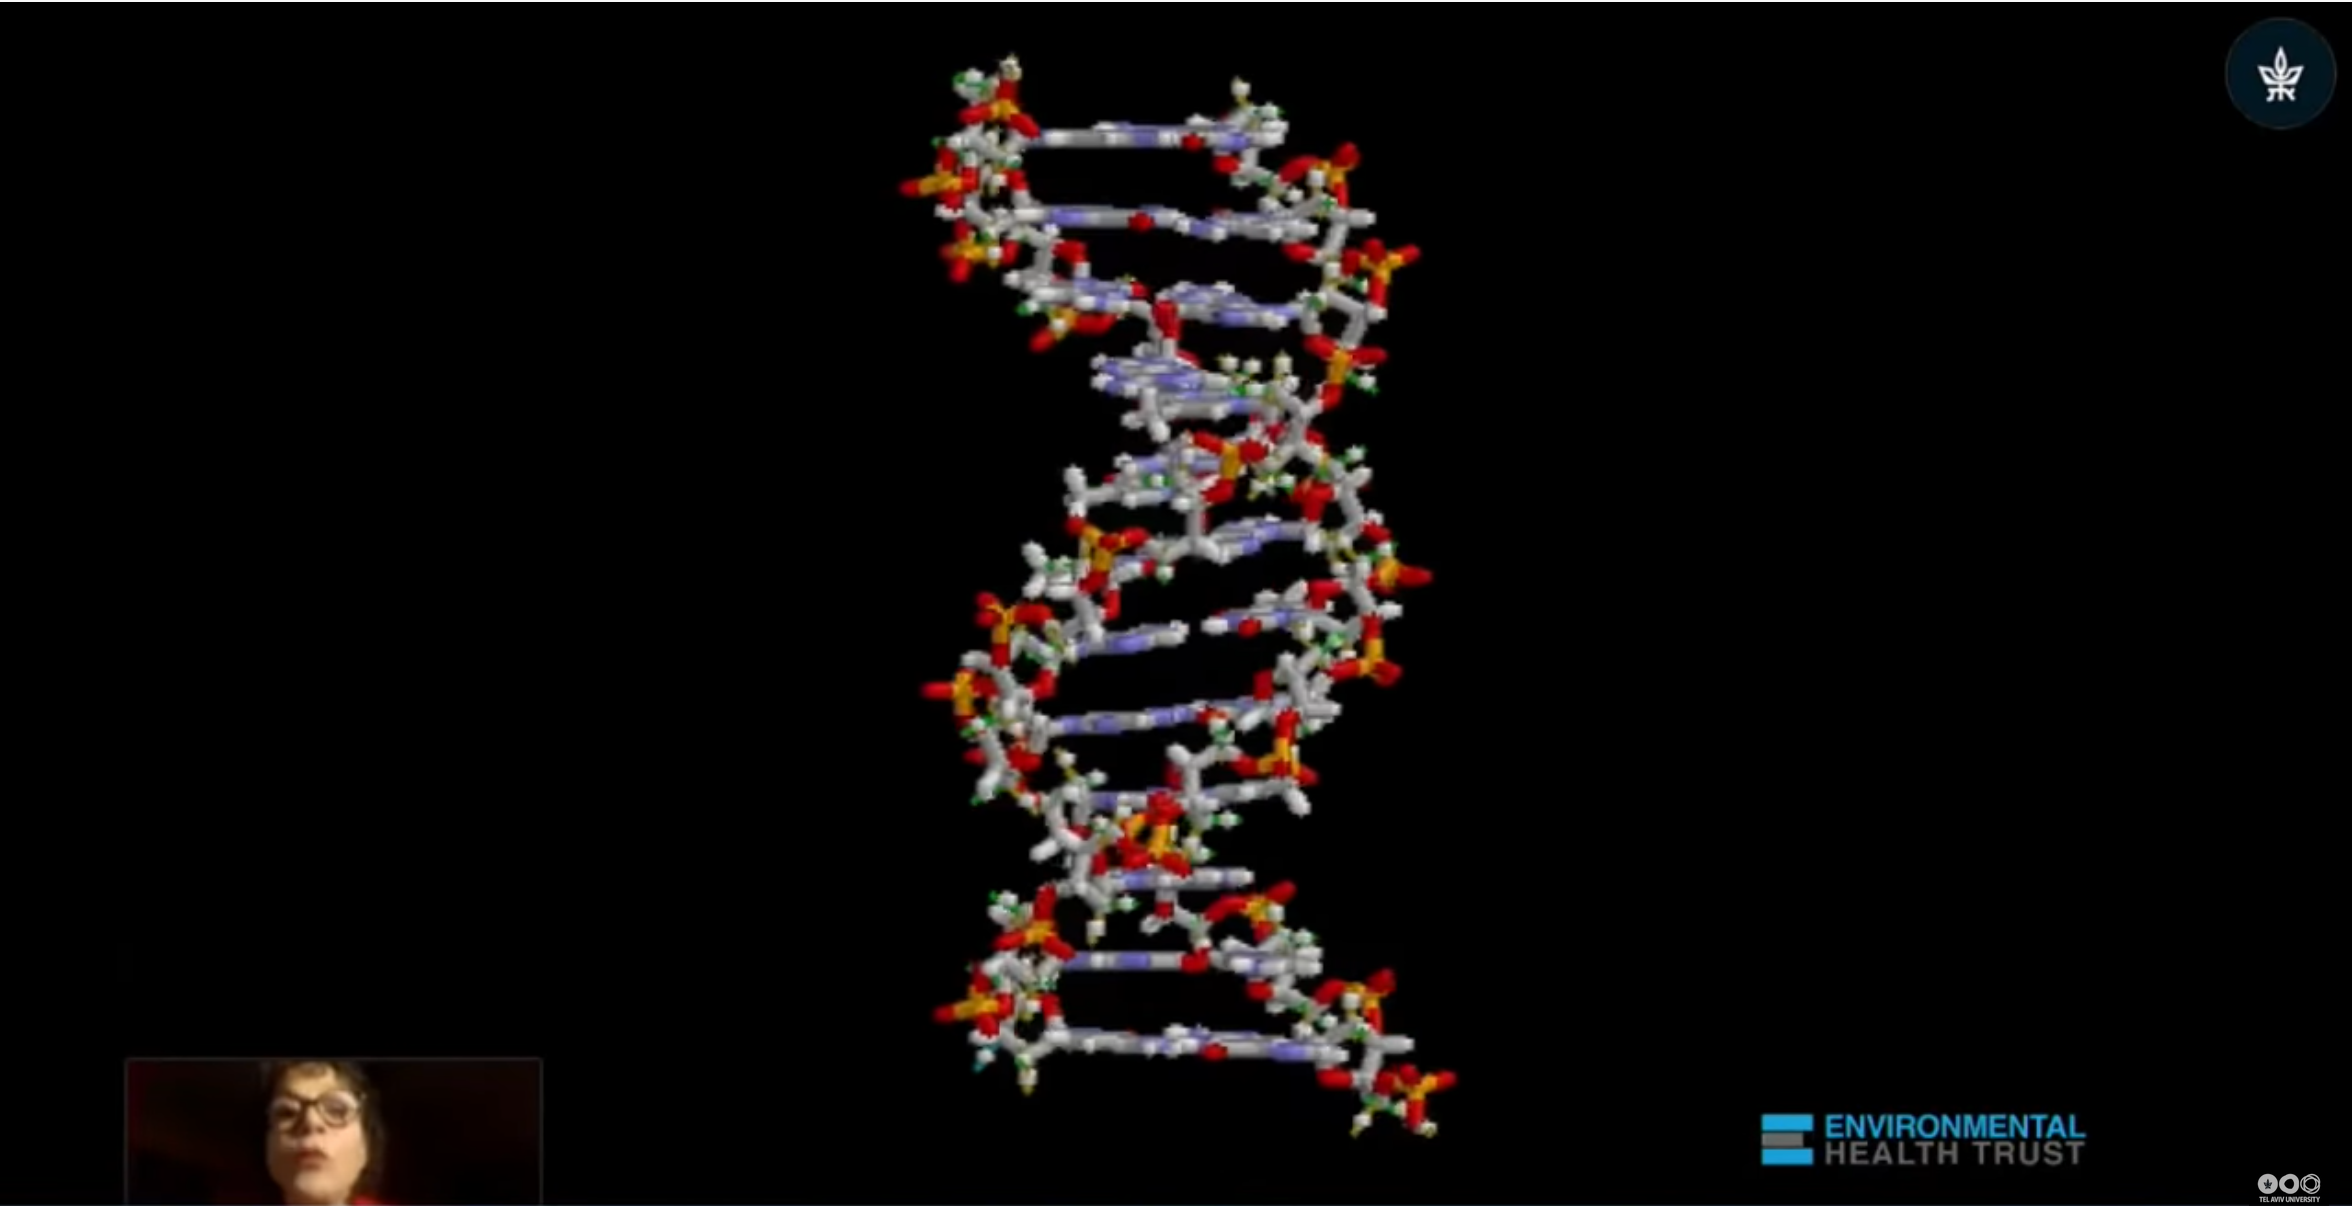 dna-strand-affected-by-mobilephone-radiation